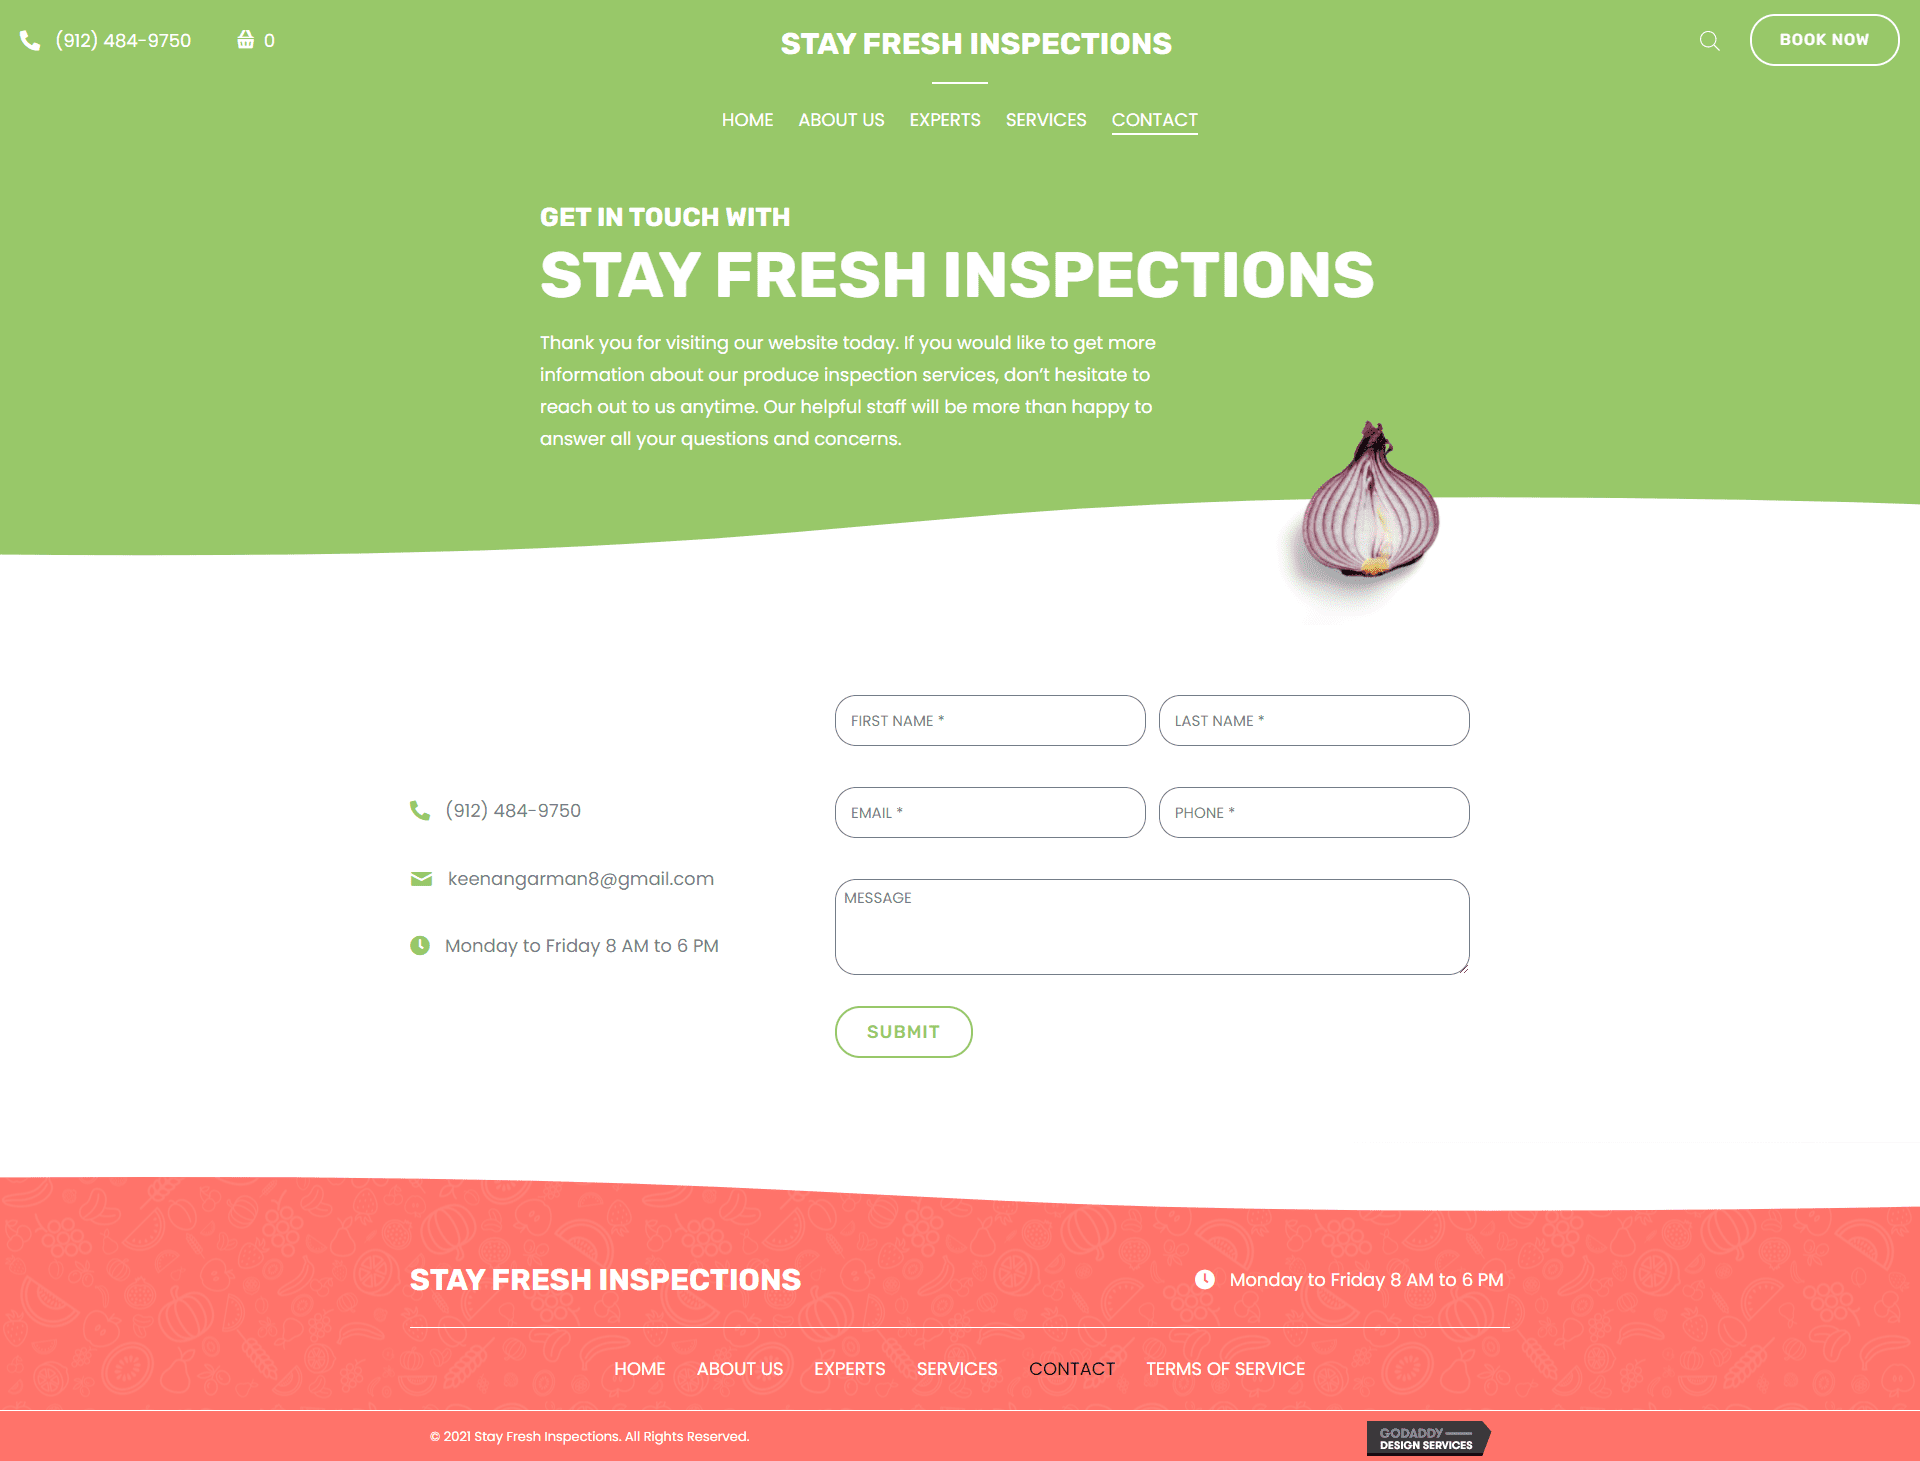 Stay Fresh Inspections Contact